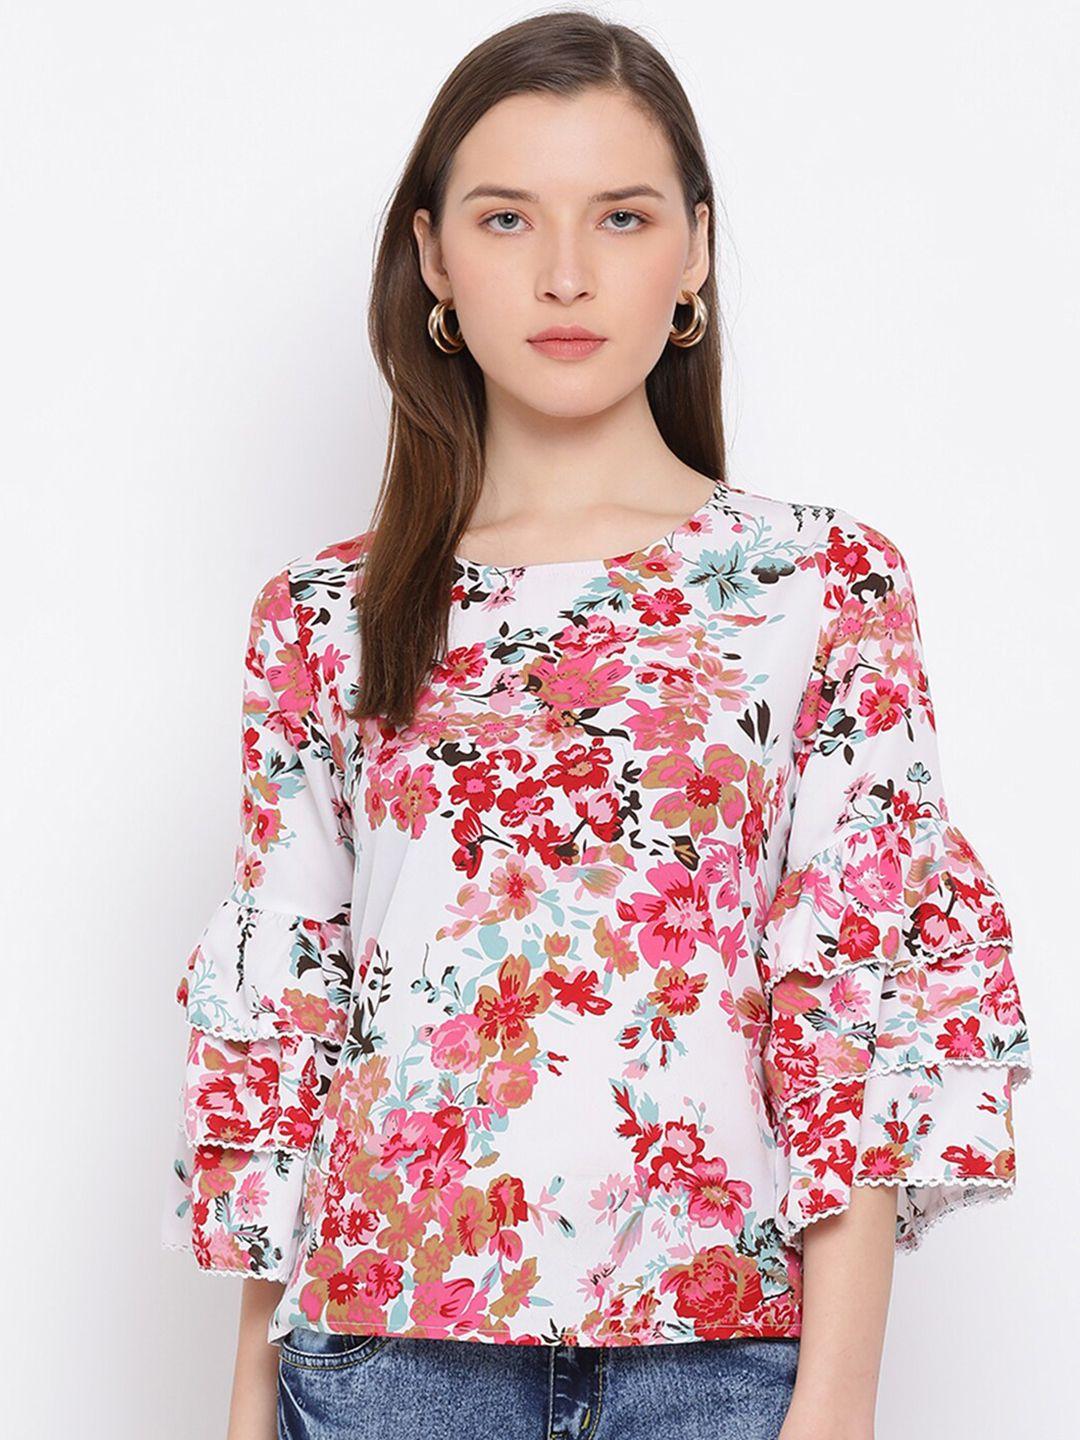 draax fashions white & pink floral regular top